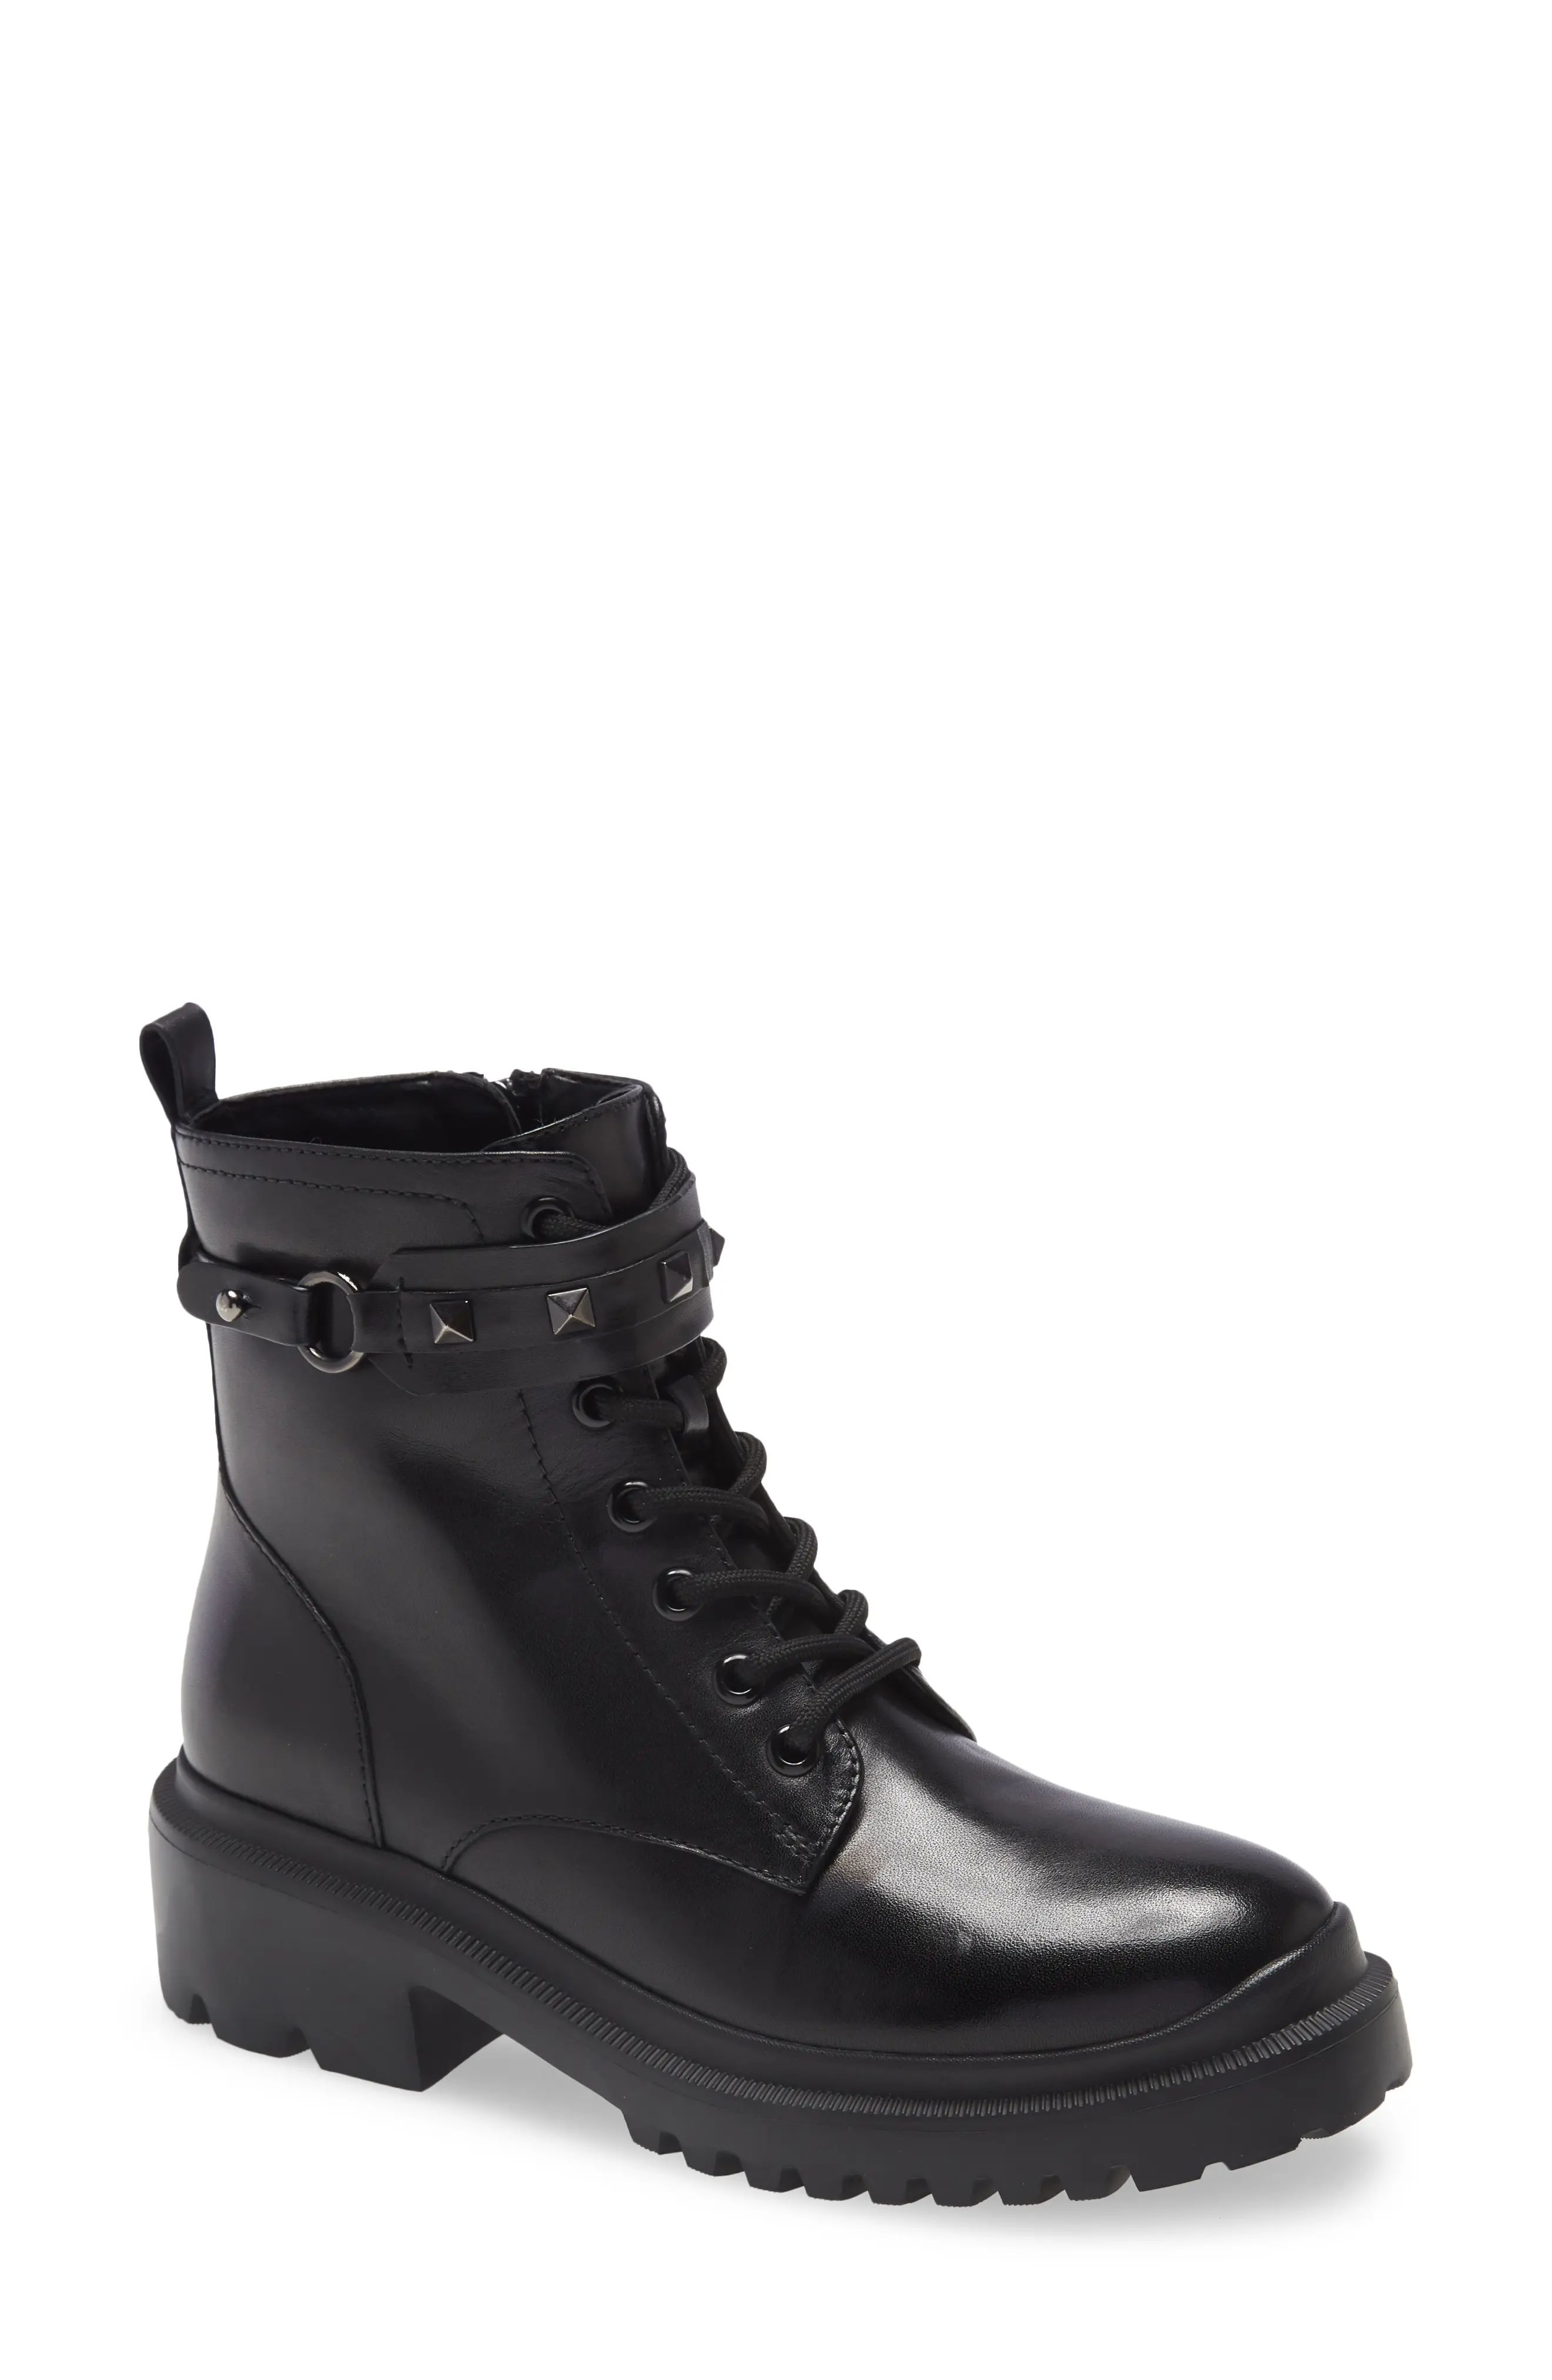 Blondo Cecilia Waterproof Boot, Size 9 in Black Leather at Nordstrom | Nordstrom